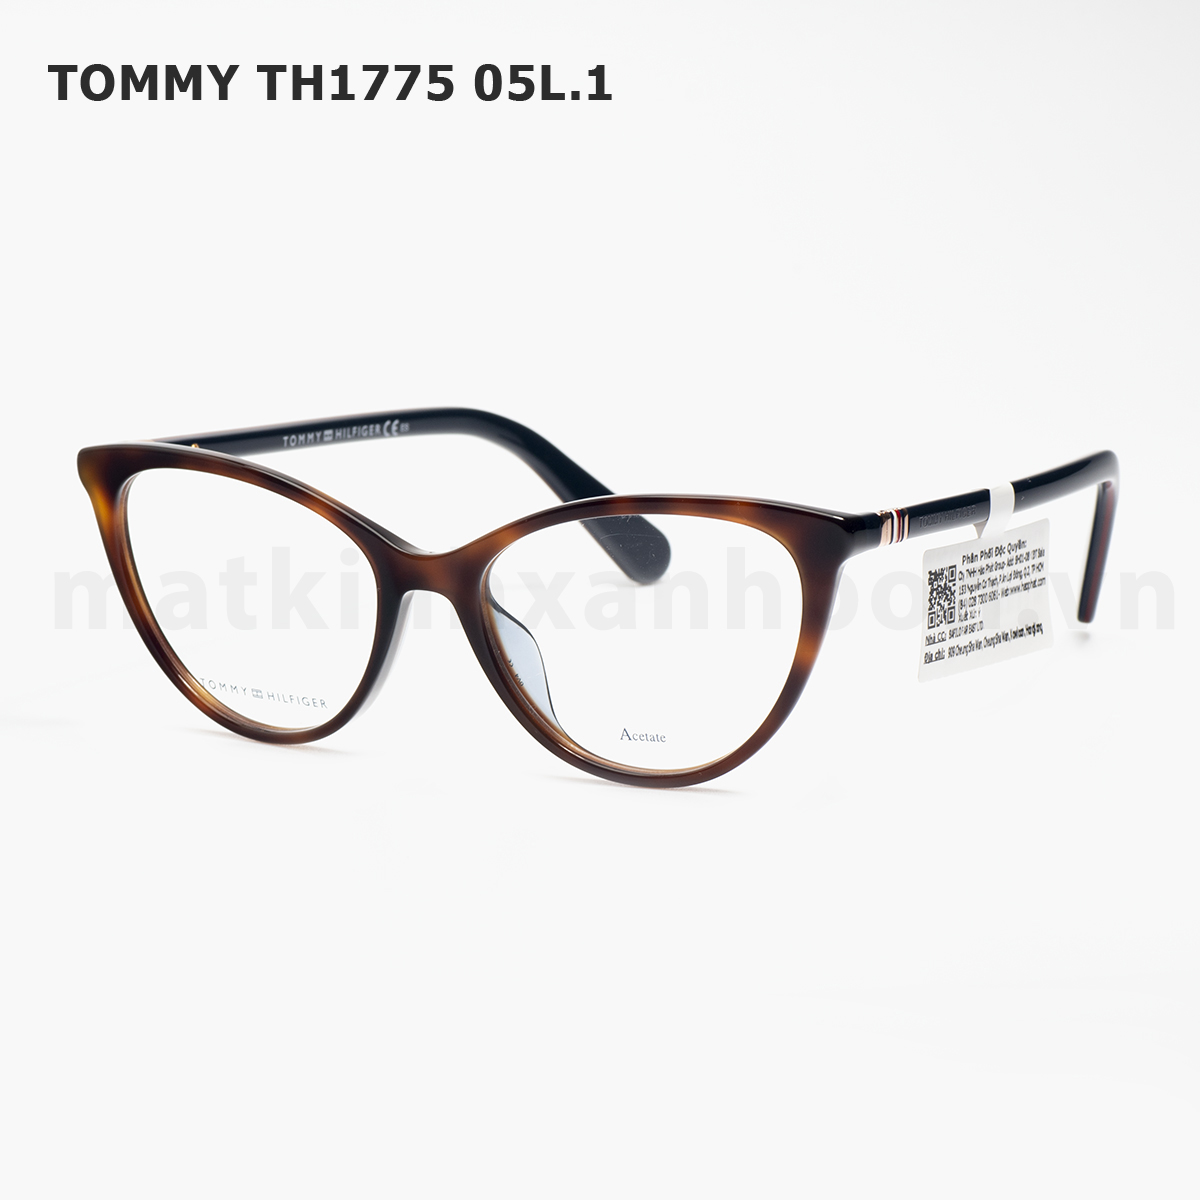 Tommy TH1775 05L.1